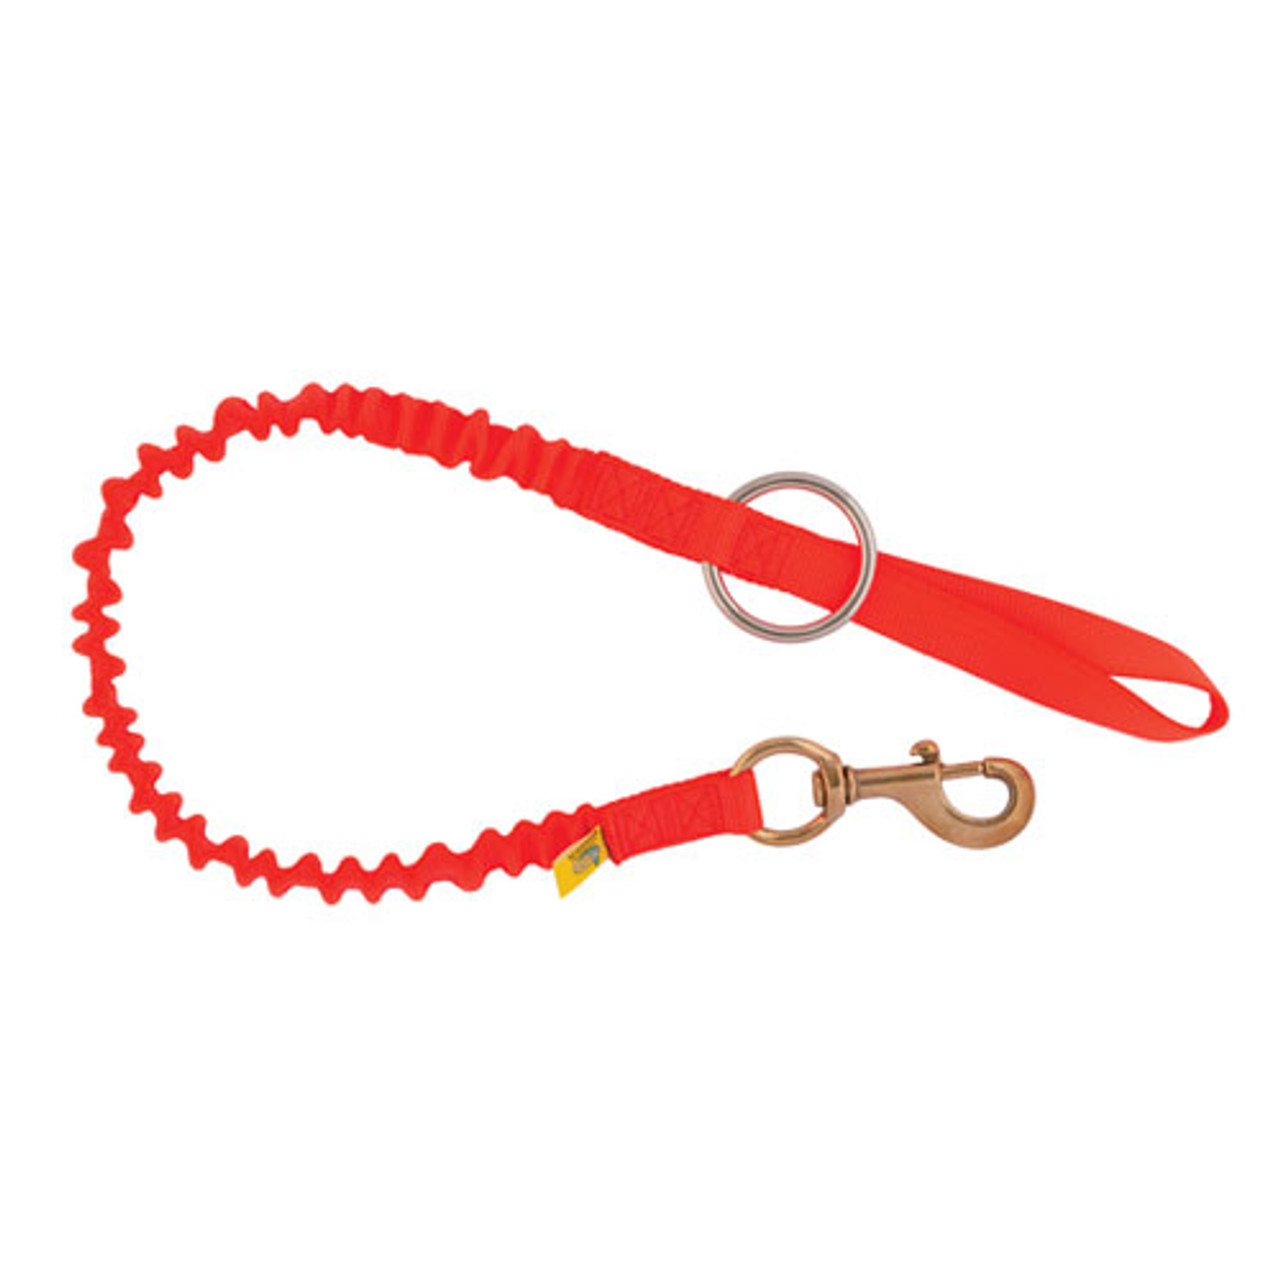 2-in-1 Snap & Snap Chainsaw Lanyard